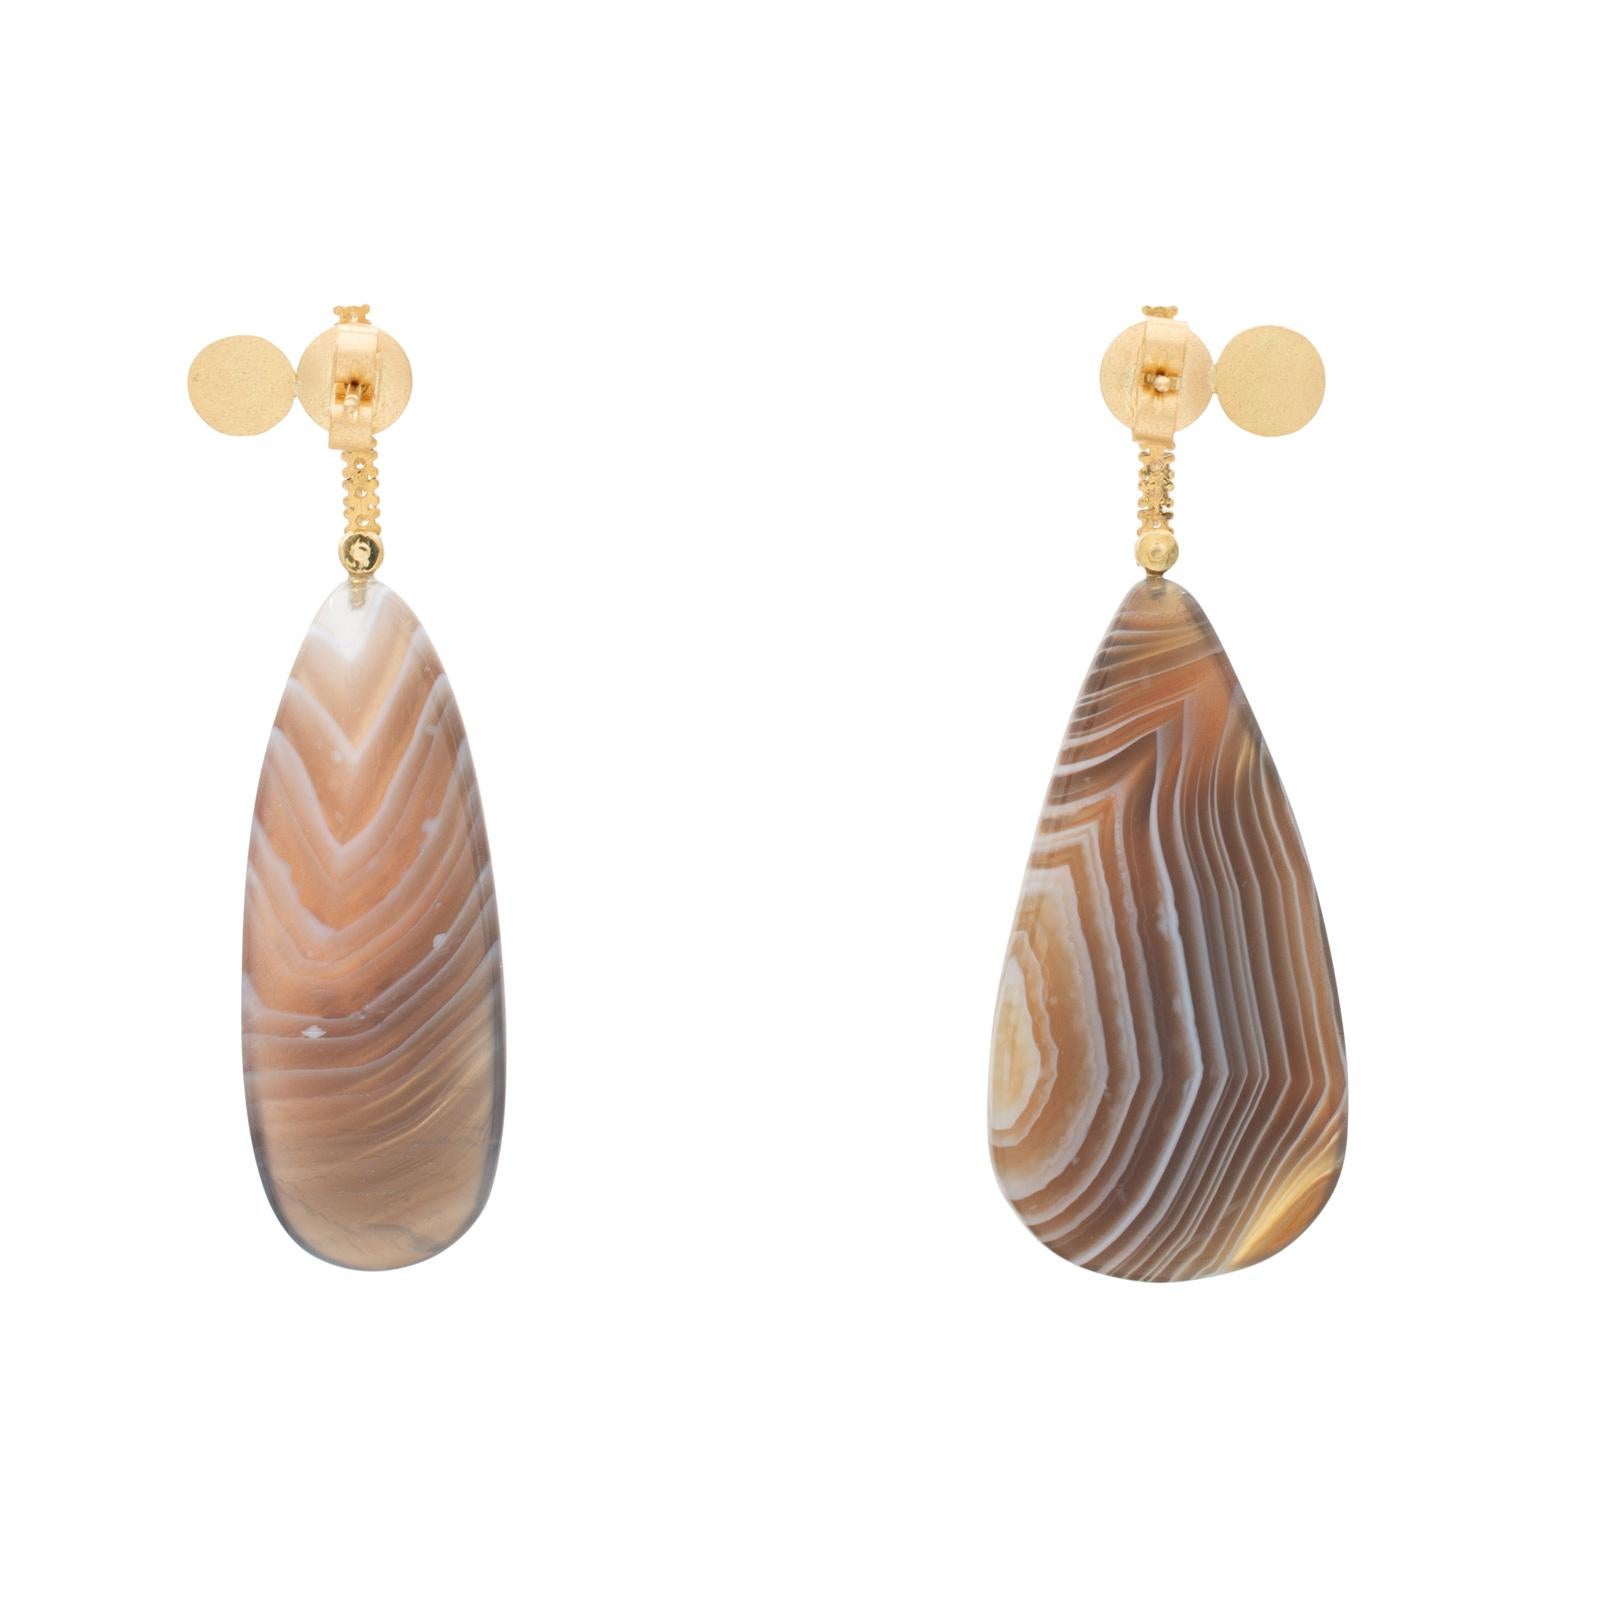 White Diamonds set in 18 carat recycled gold with Botswana Agate in opposing shapes designed by Cresta Bledsoe. Gemstones are ethically sourced and non-heat treated. All of the pieces are one-of-a-kind and handmade by a single artisan in the USA